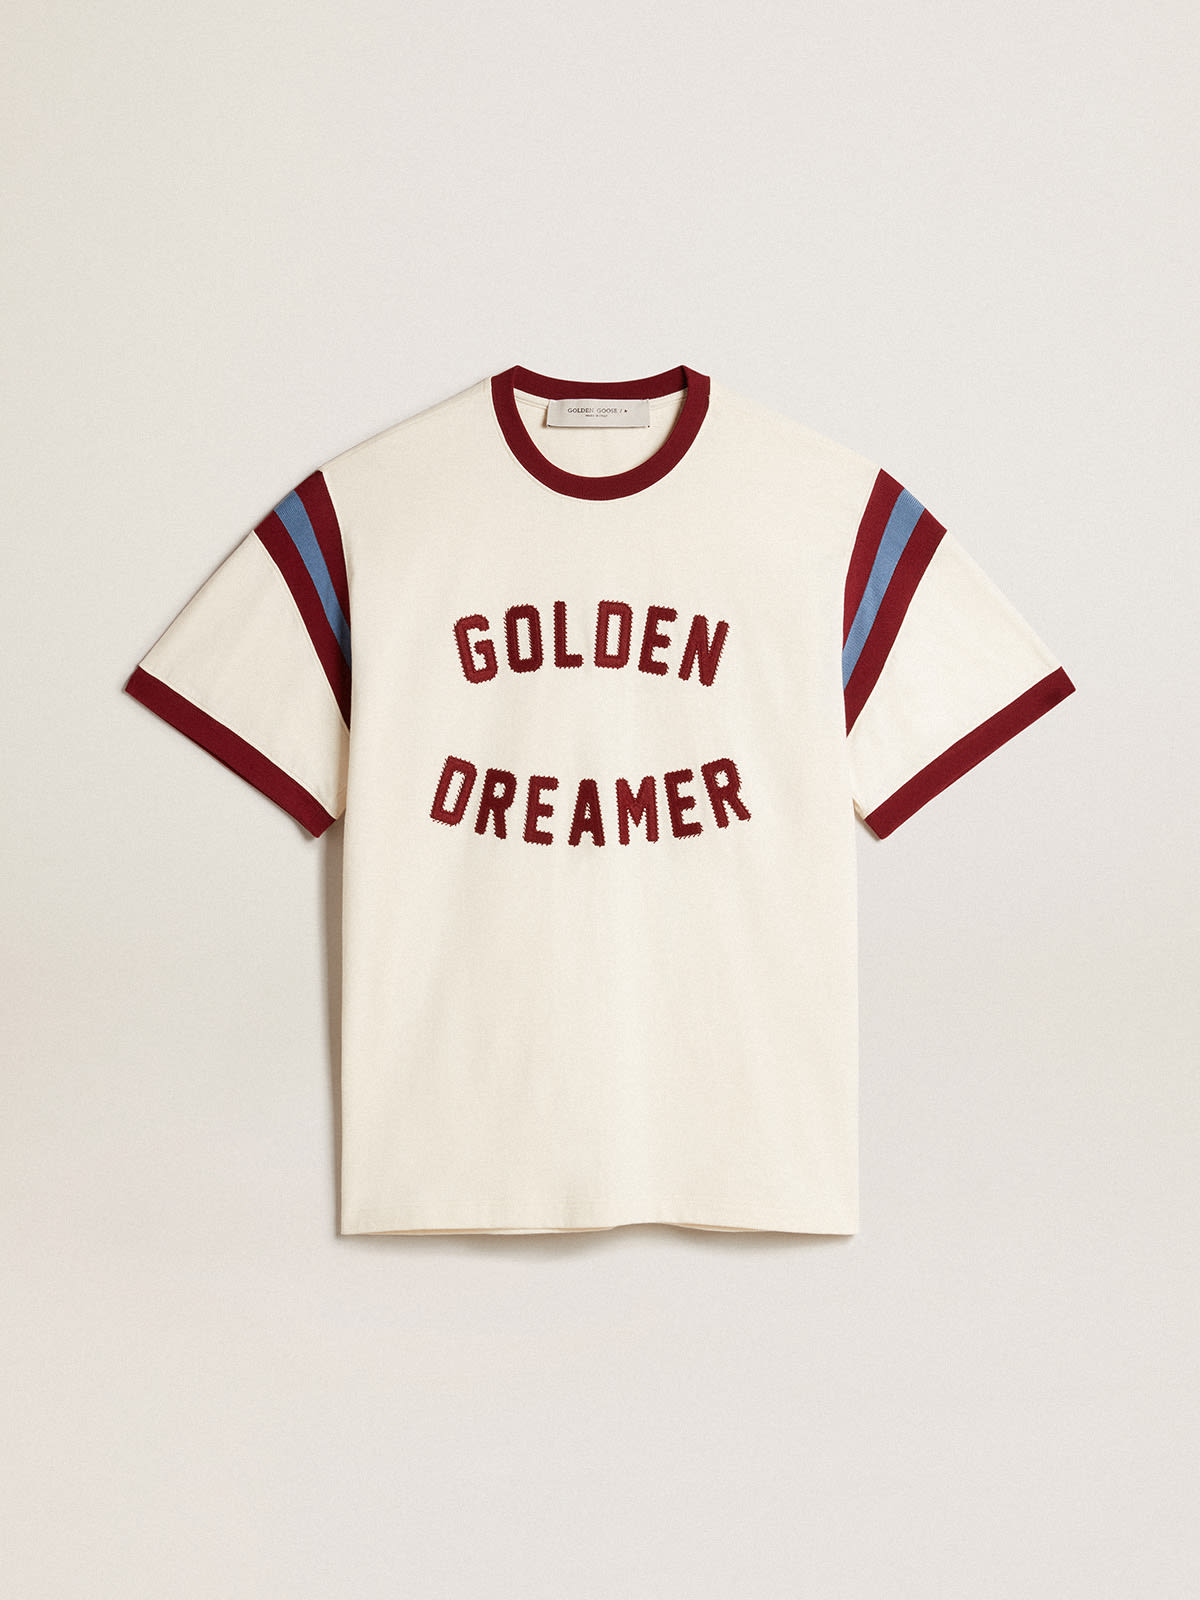 Golden Goose - Men’s white T-shirt with burgundy lettering on the front in 